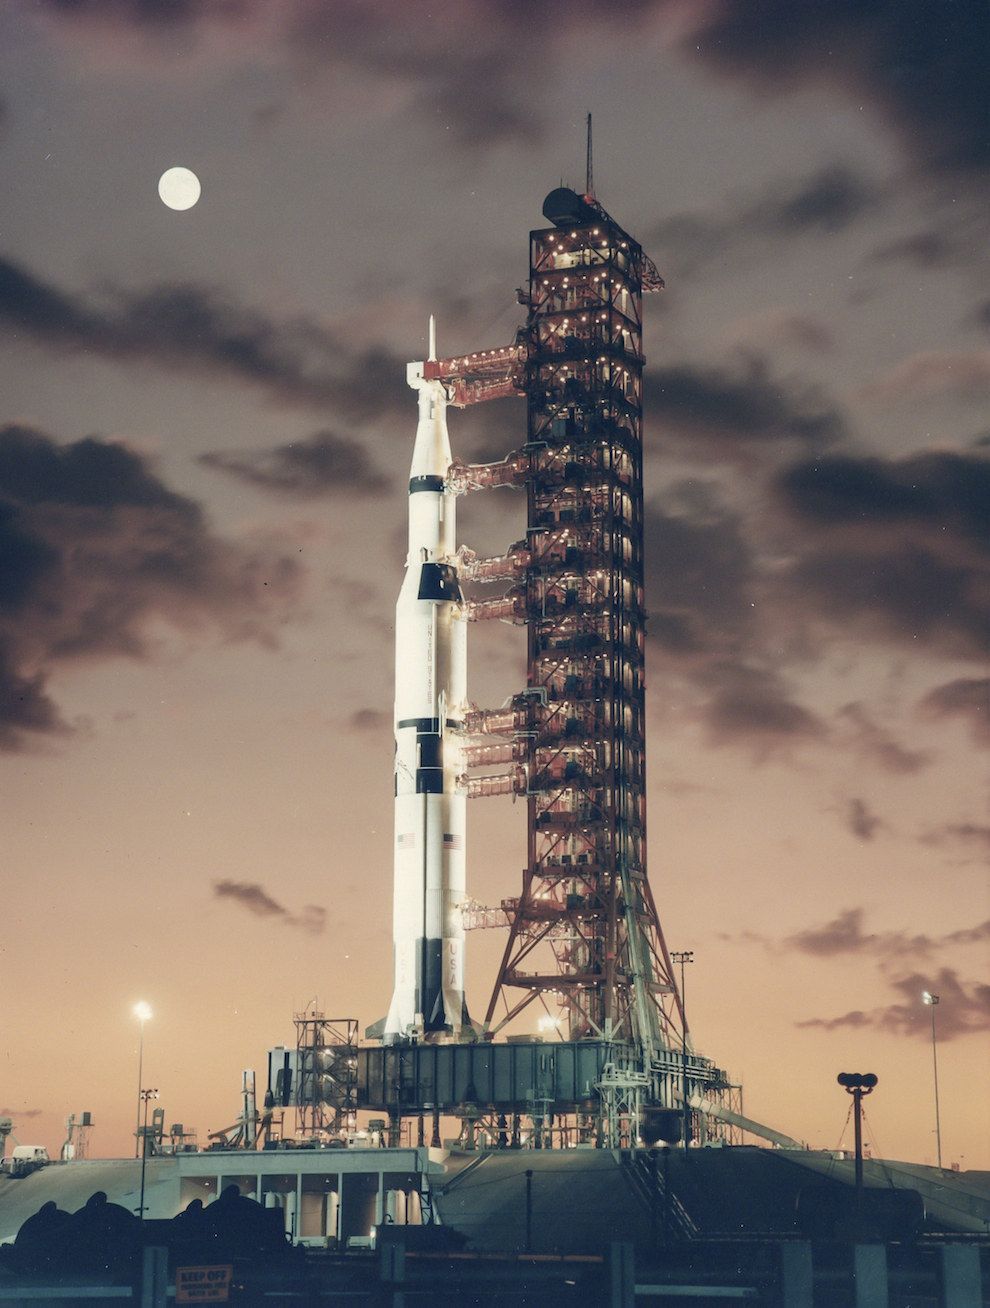 And the Saturn V rocket on the launch pad in November 1967. Nasa